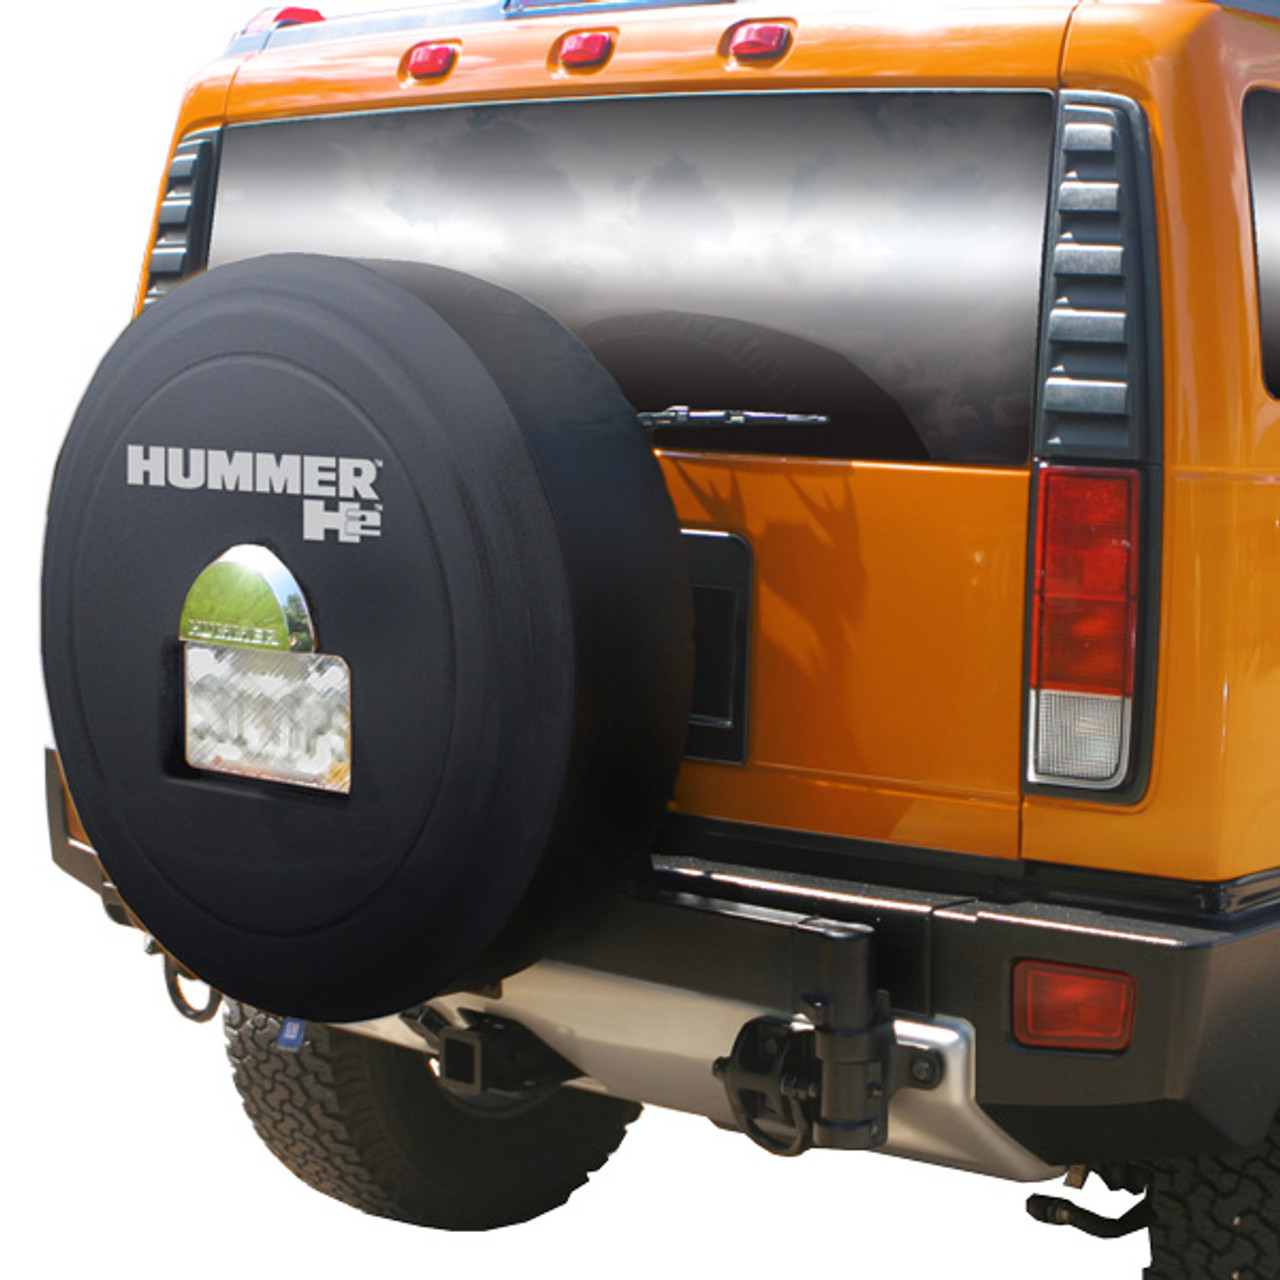 2005-2010 Hummer H2 Rigid Tire Cover by Boomerang Official GM Licensed Hummer  Tire Covers